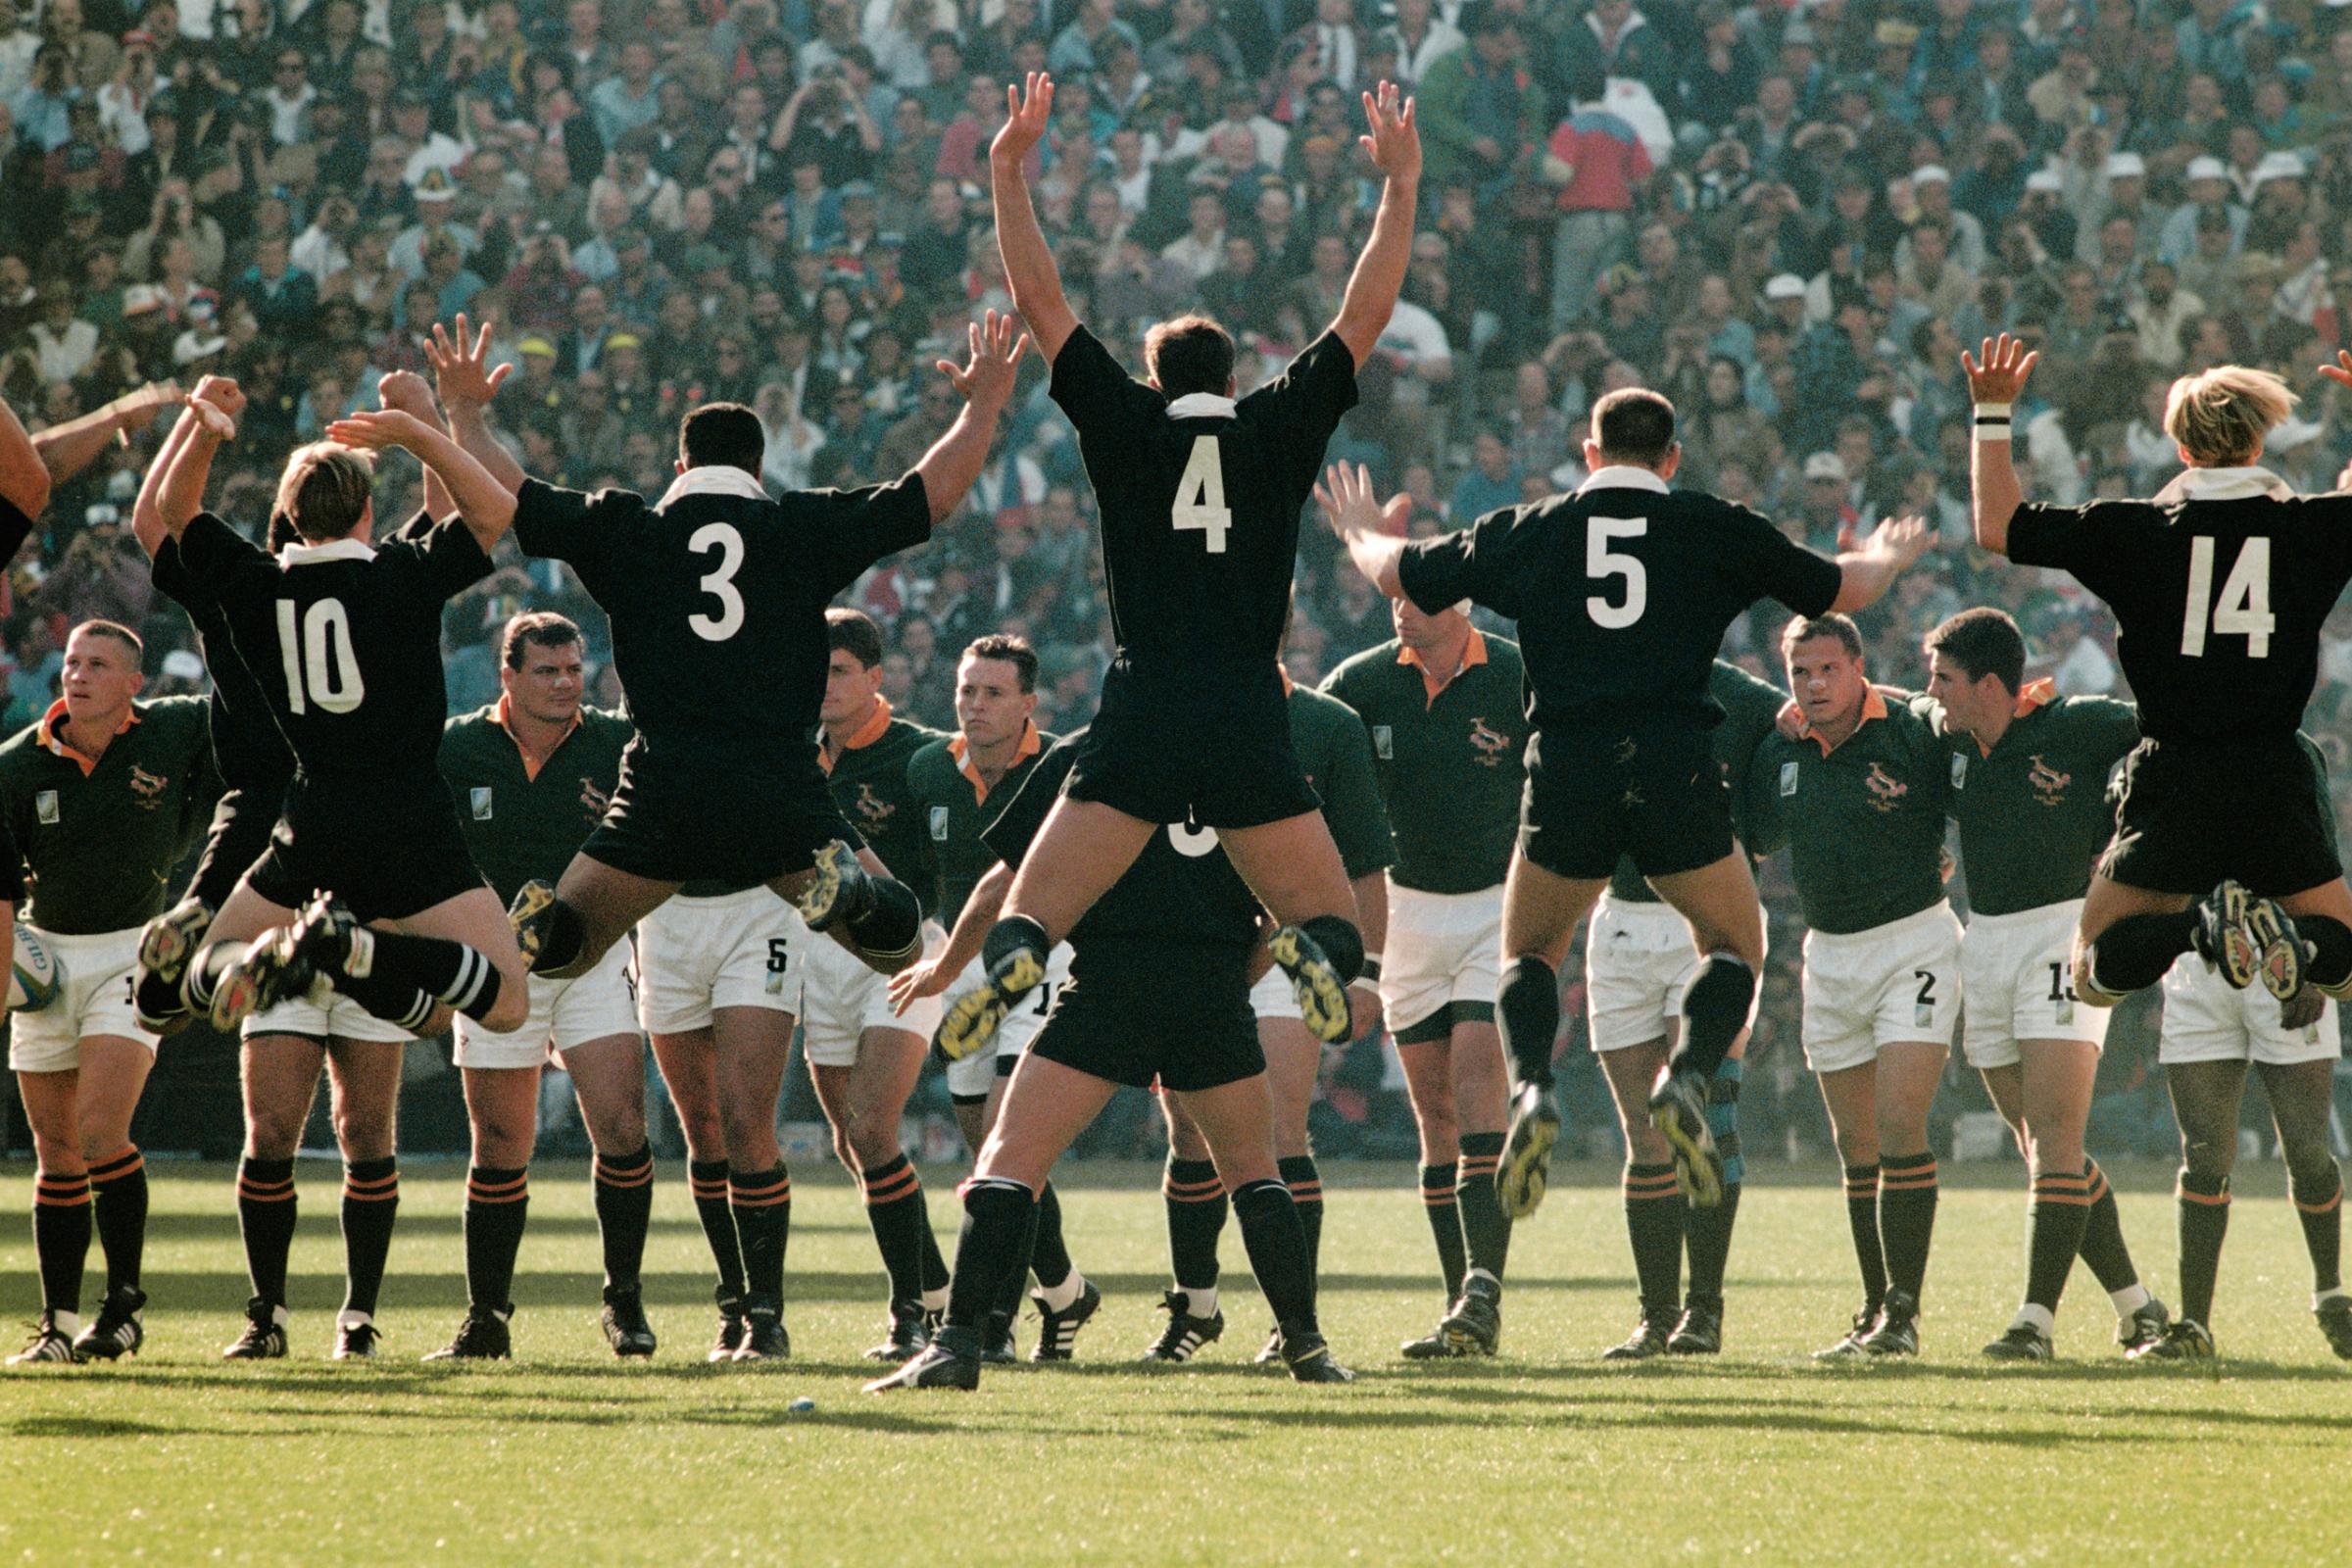 New Zealand's players perform their famous Haka in front of the South African team before the 1995 Rugby Union World Cup final